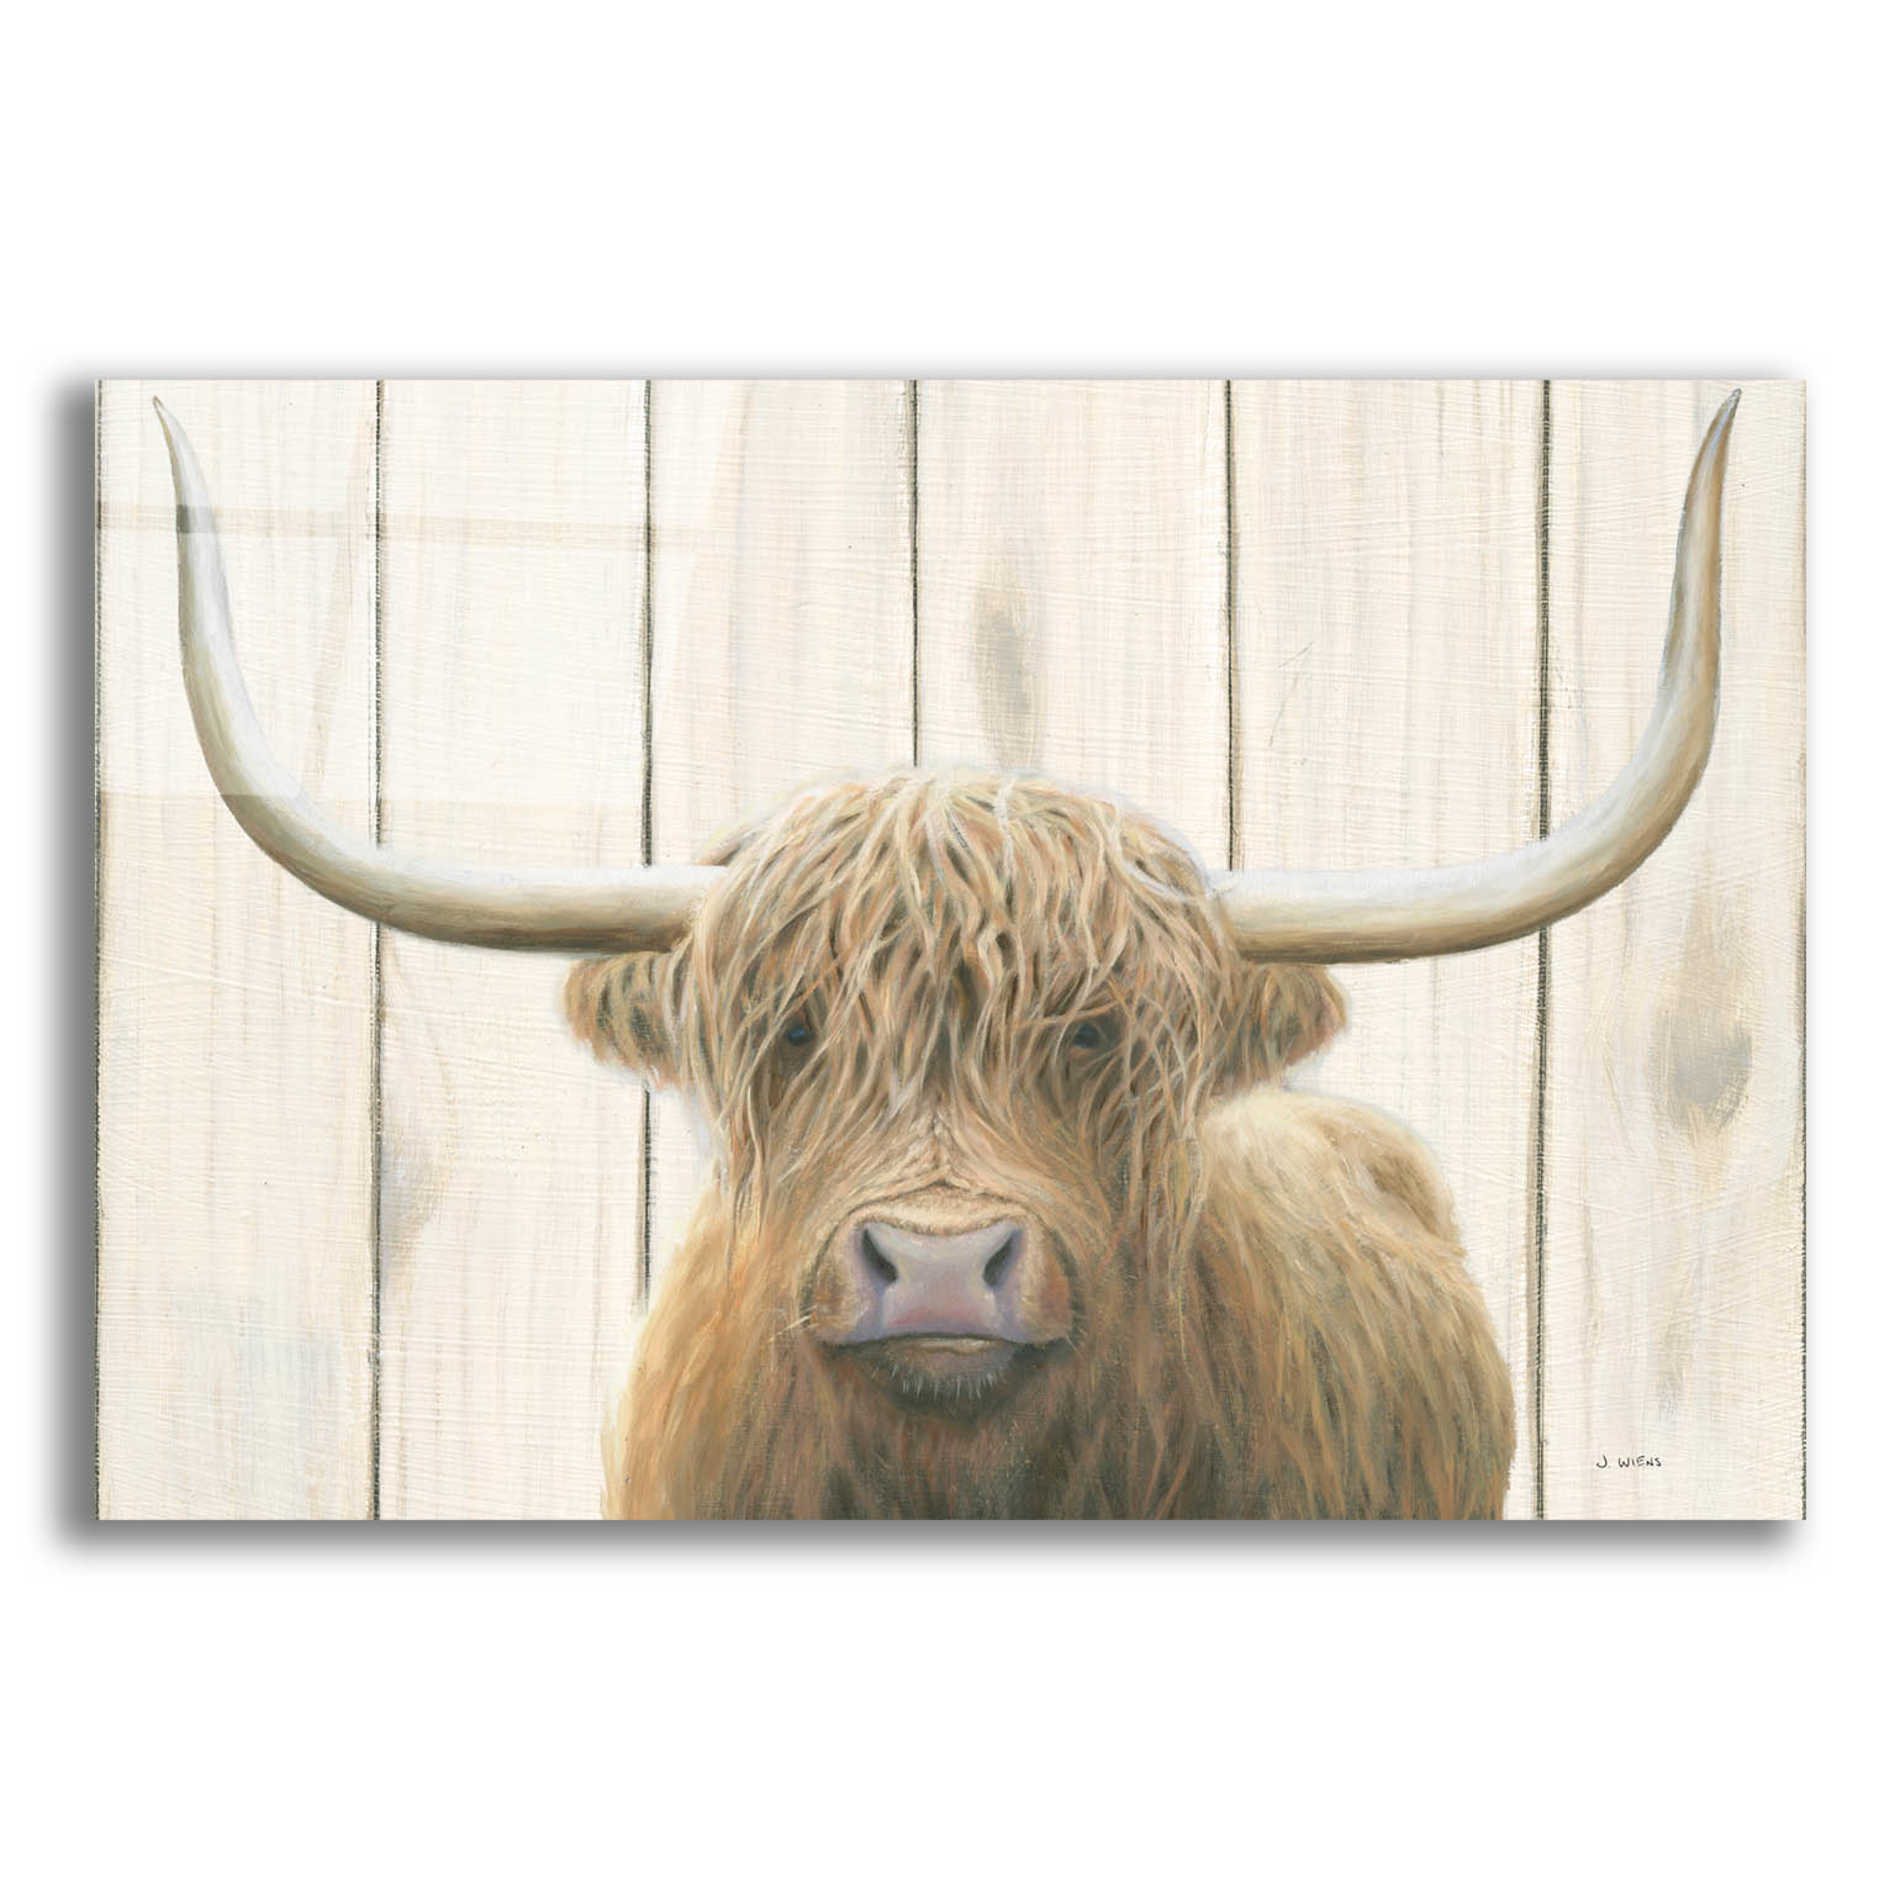 Epic Art 'Highland Cow Shiplap' by James Wiens, Acrylic Glass Wall Art,18x12x1.1x0,26x18x1.1x0,40x26x1.74x0,60x40x1.74x0